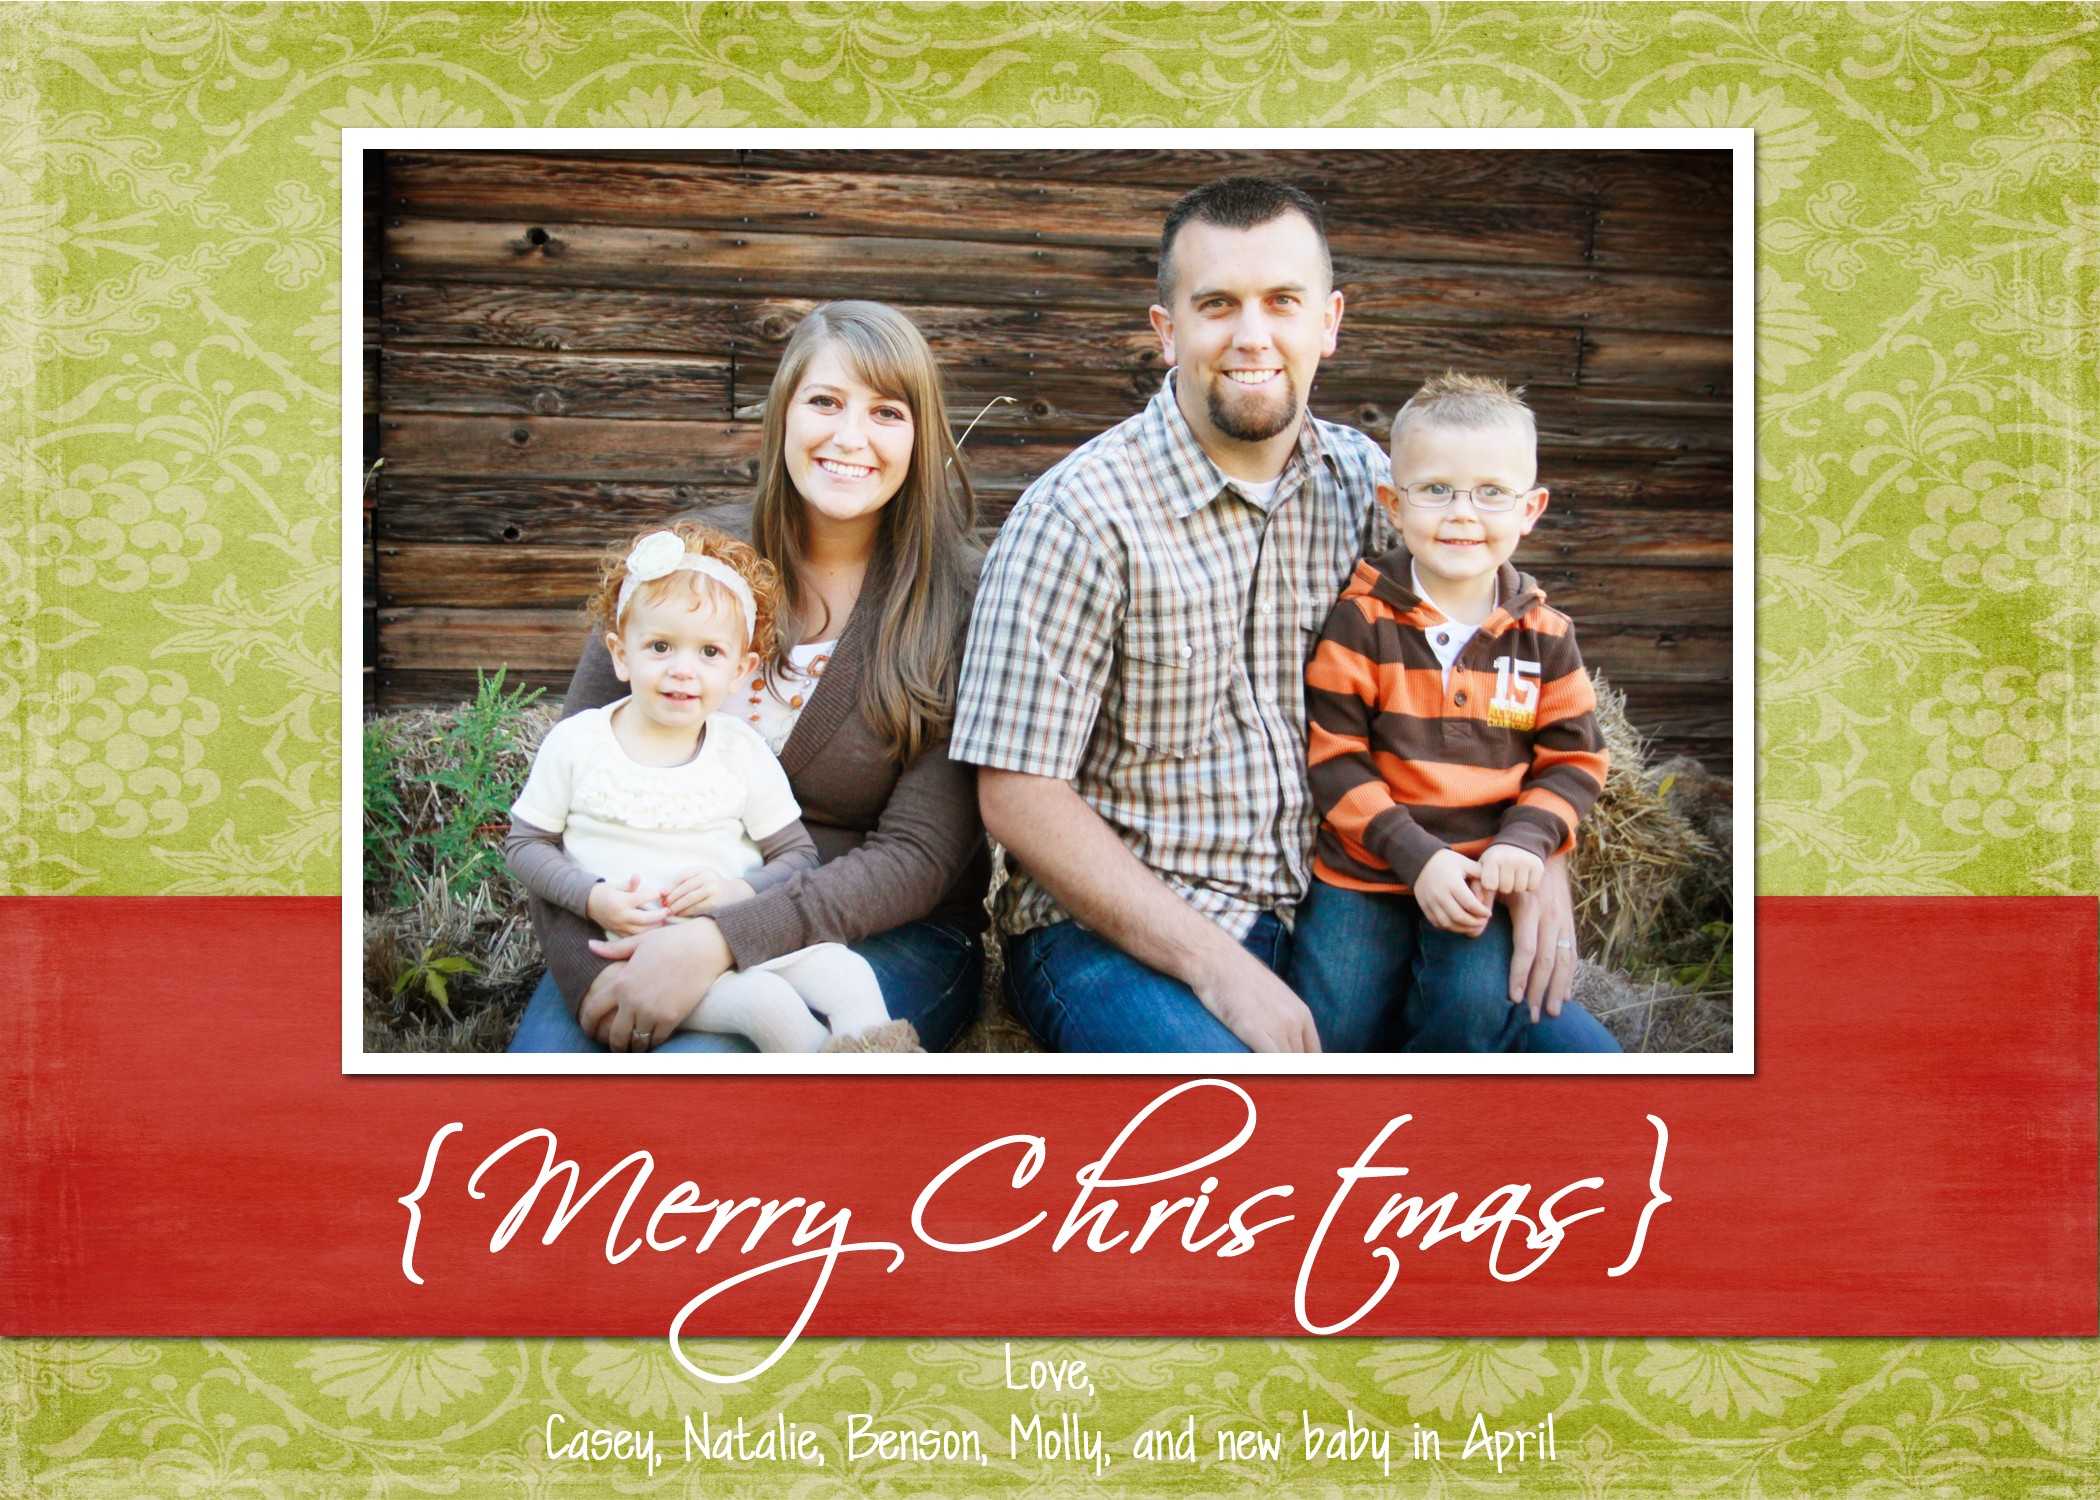 Christmas Card Templates Photoshop Free Download Penaime In Free Photoshop Christmas Card Templates For Photographers